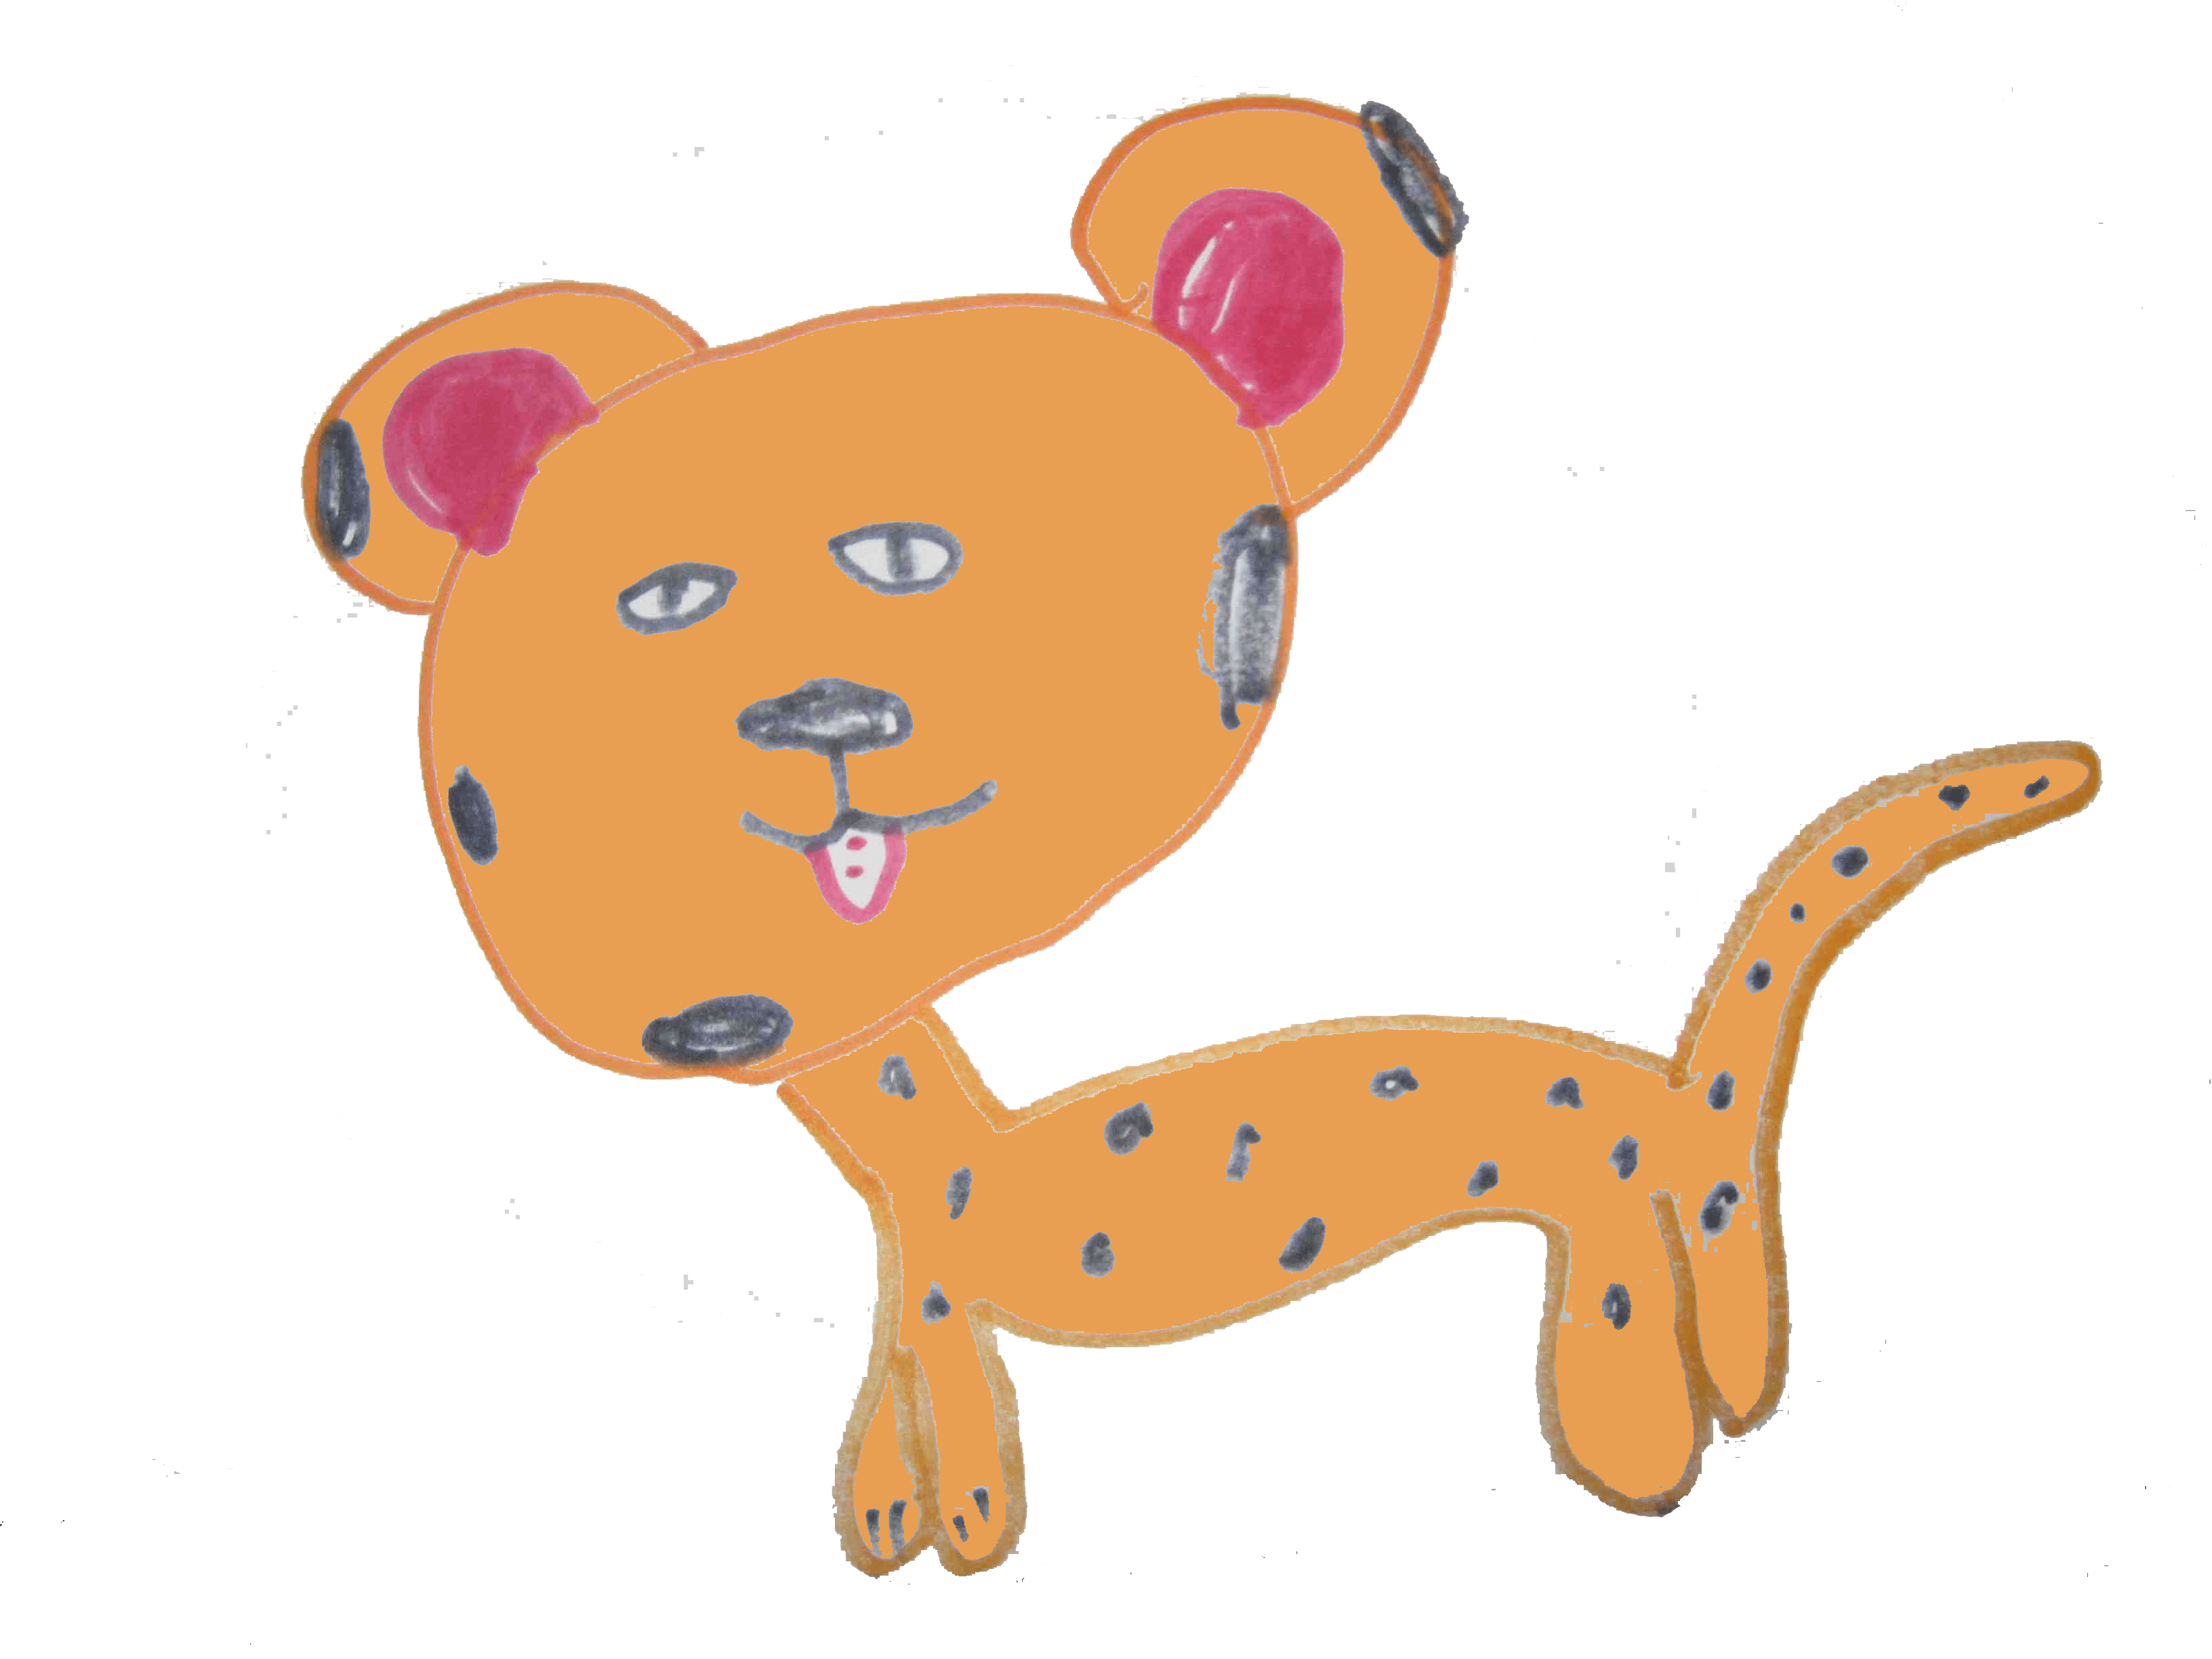 Goldie is a cheetah that represents the desire of kids to save cheetahs.